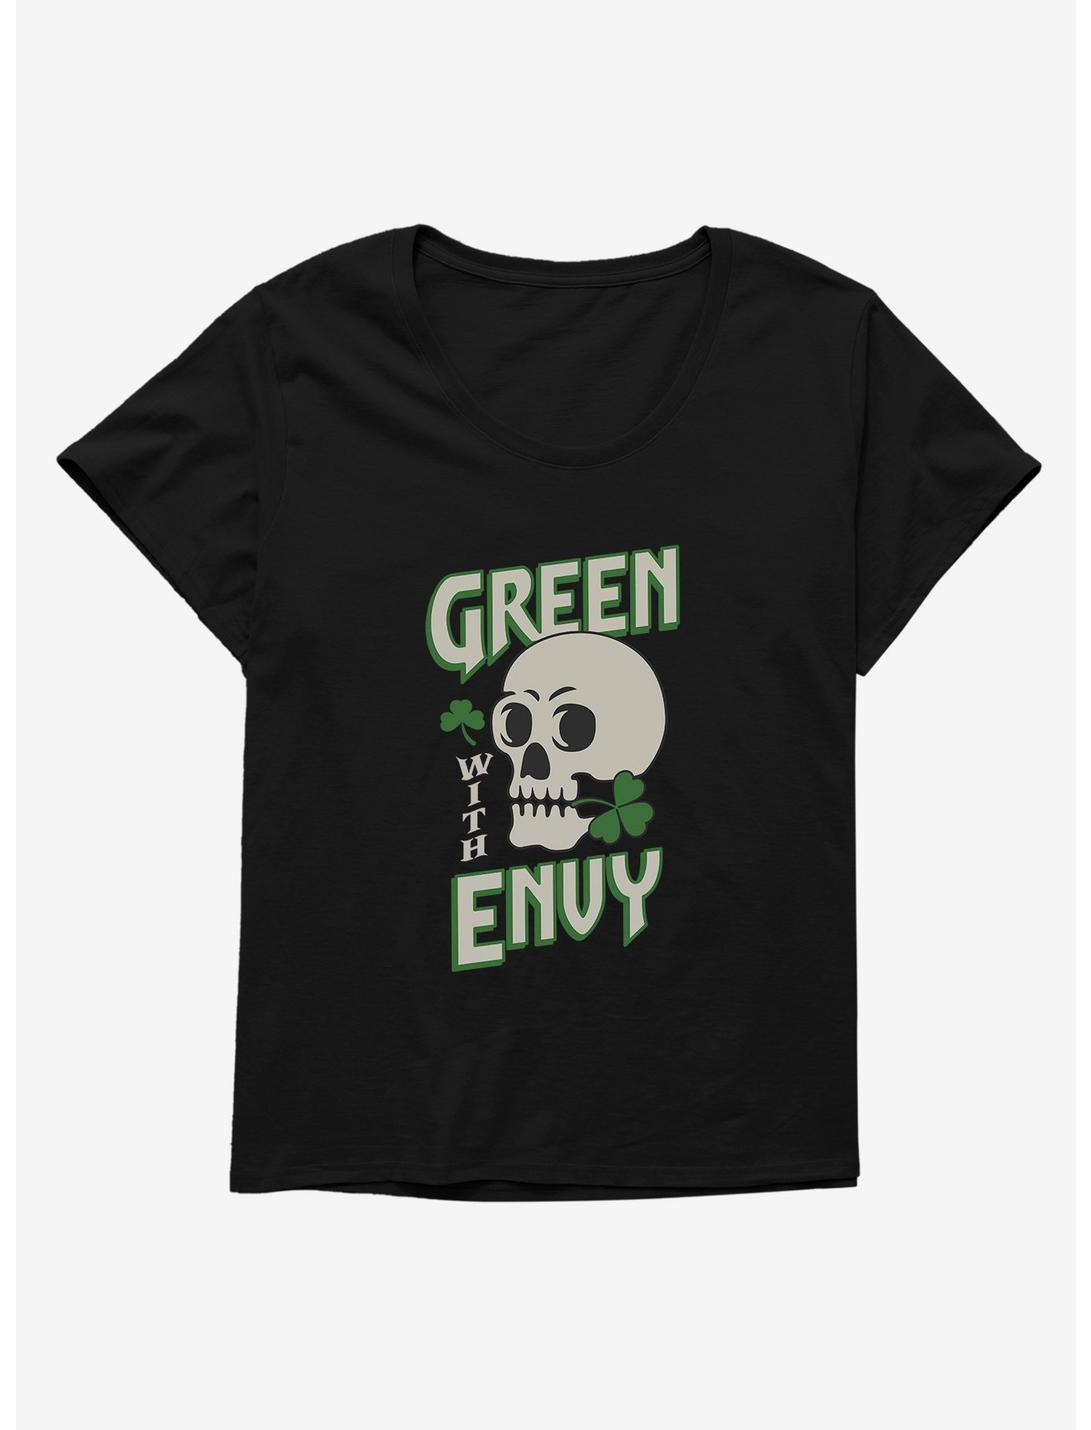 St. Patty's Green With Envy Womens T-Shirt Plus Size, , hi-res